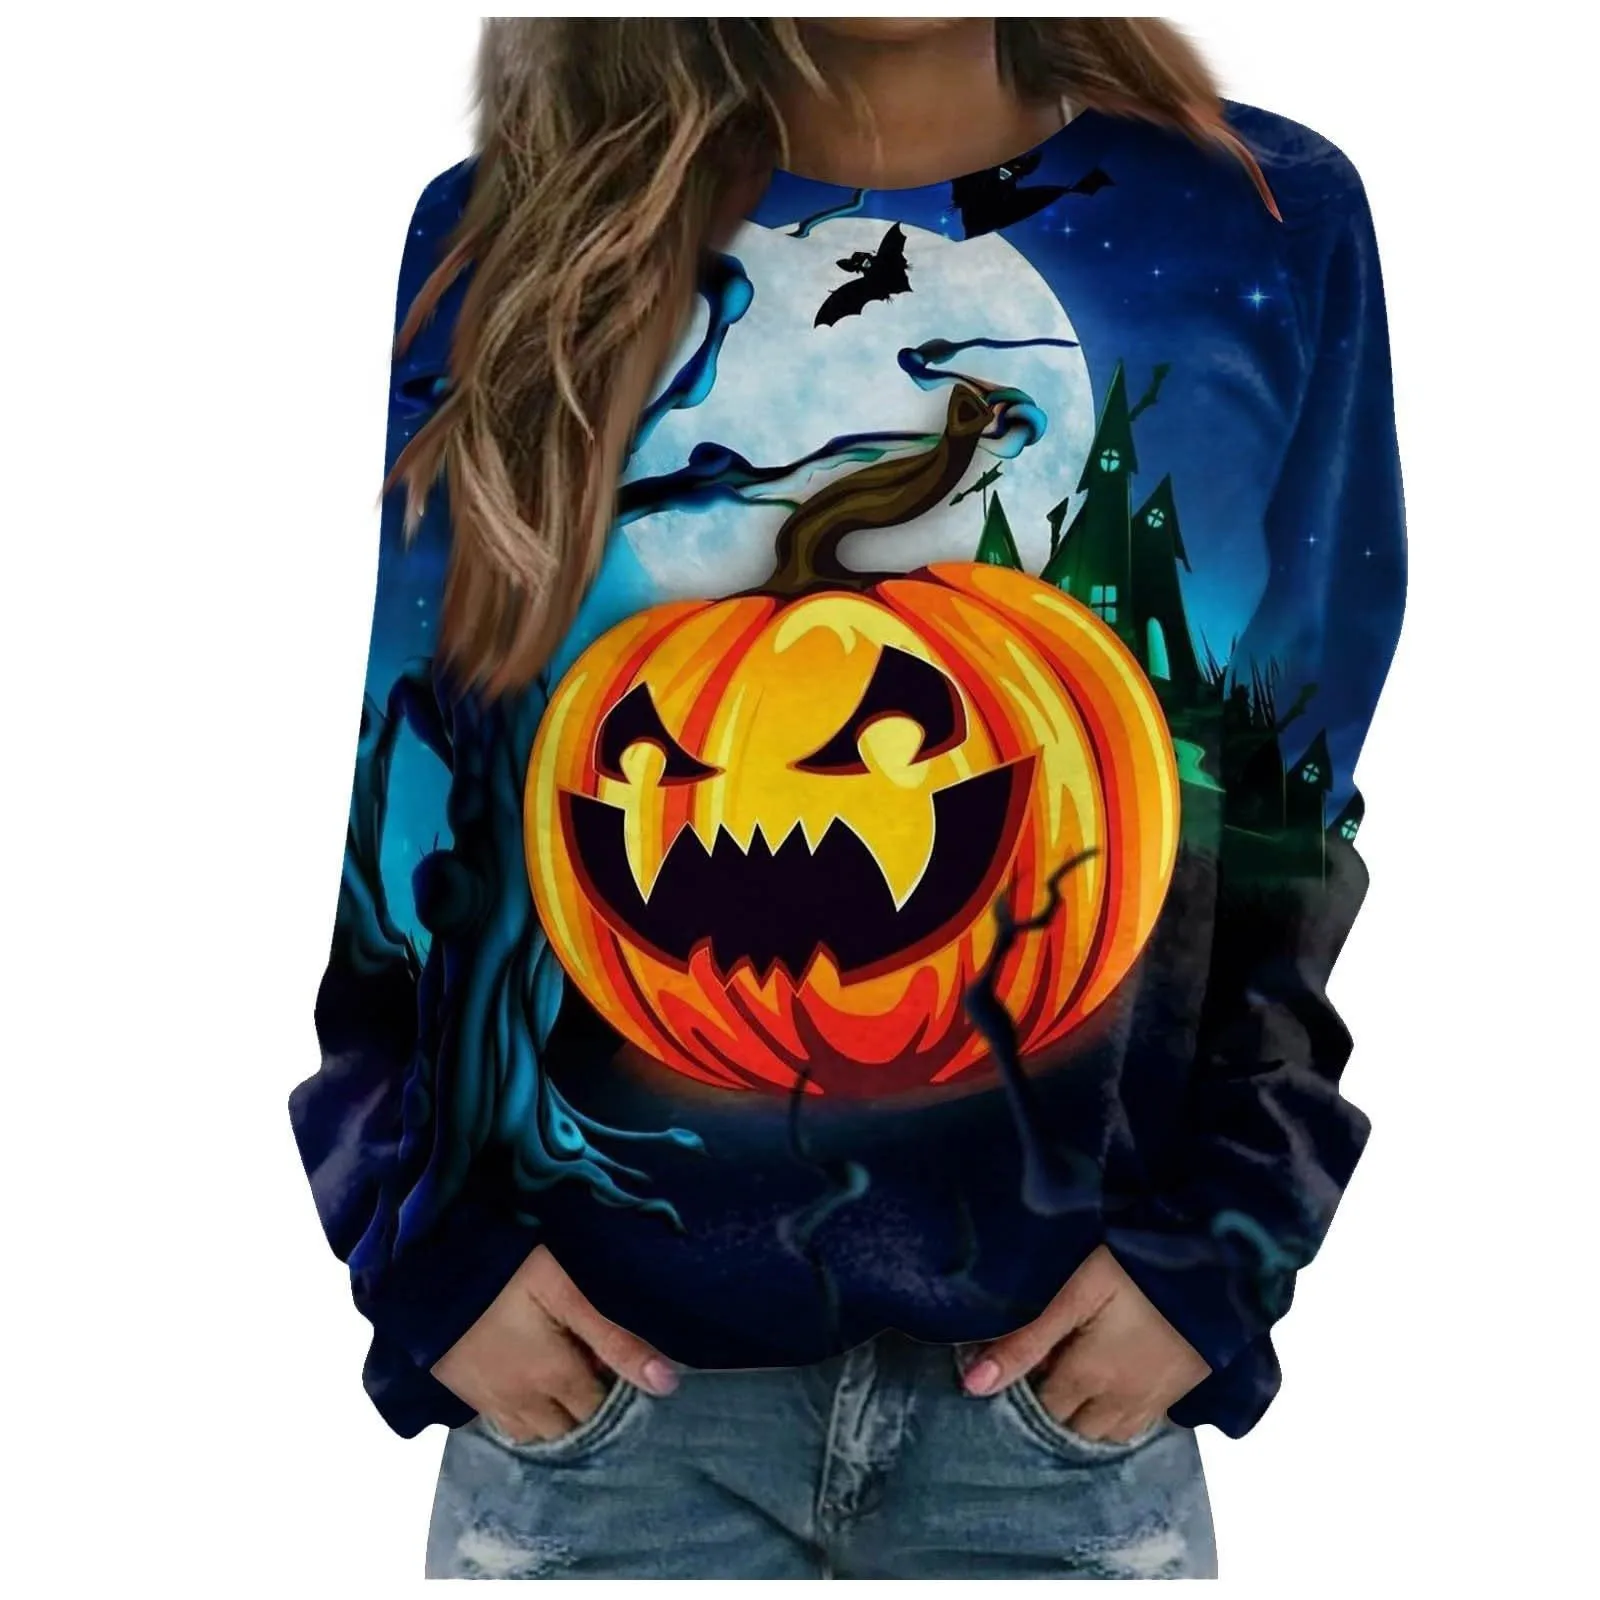 

Women's Halloween Printed Sweatshirt Sexy Elegant Round Neck Hoodless Pullover Loose Long Camisole Blouse 3x Workout Shirts